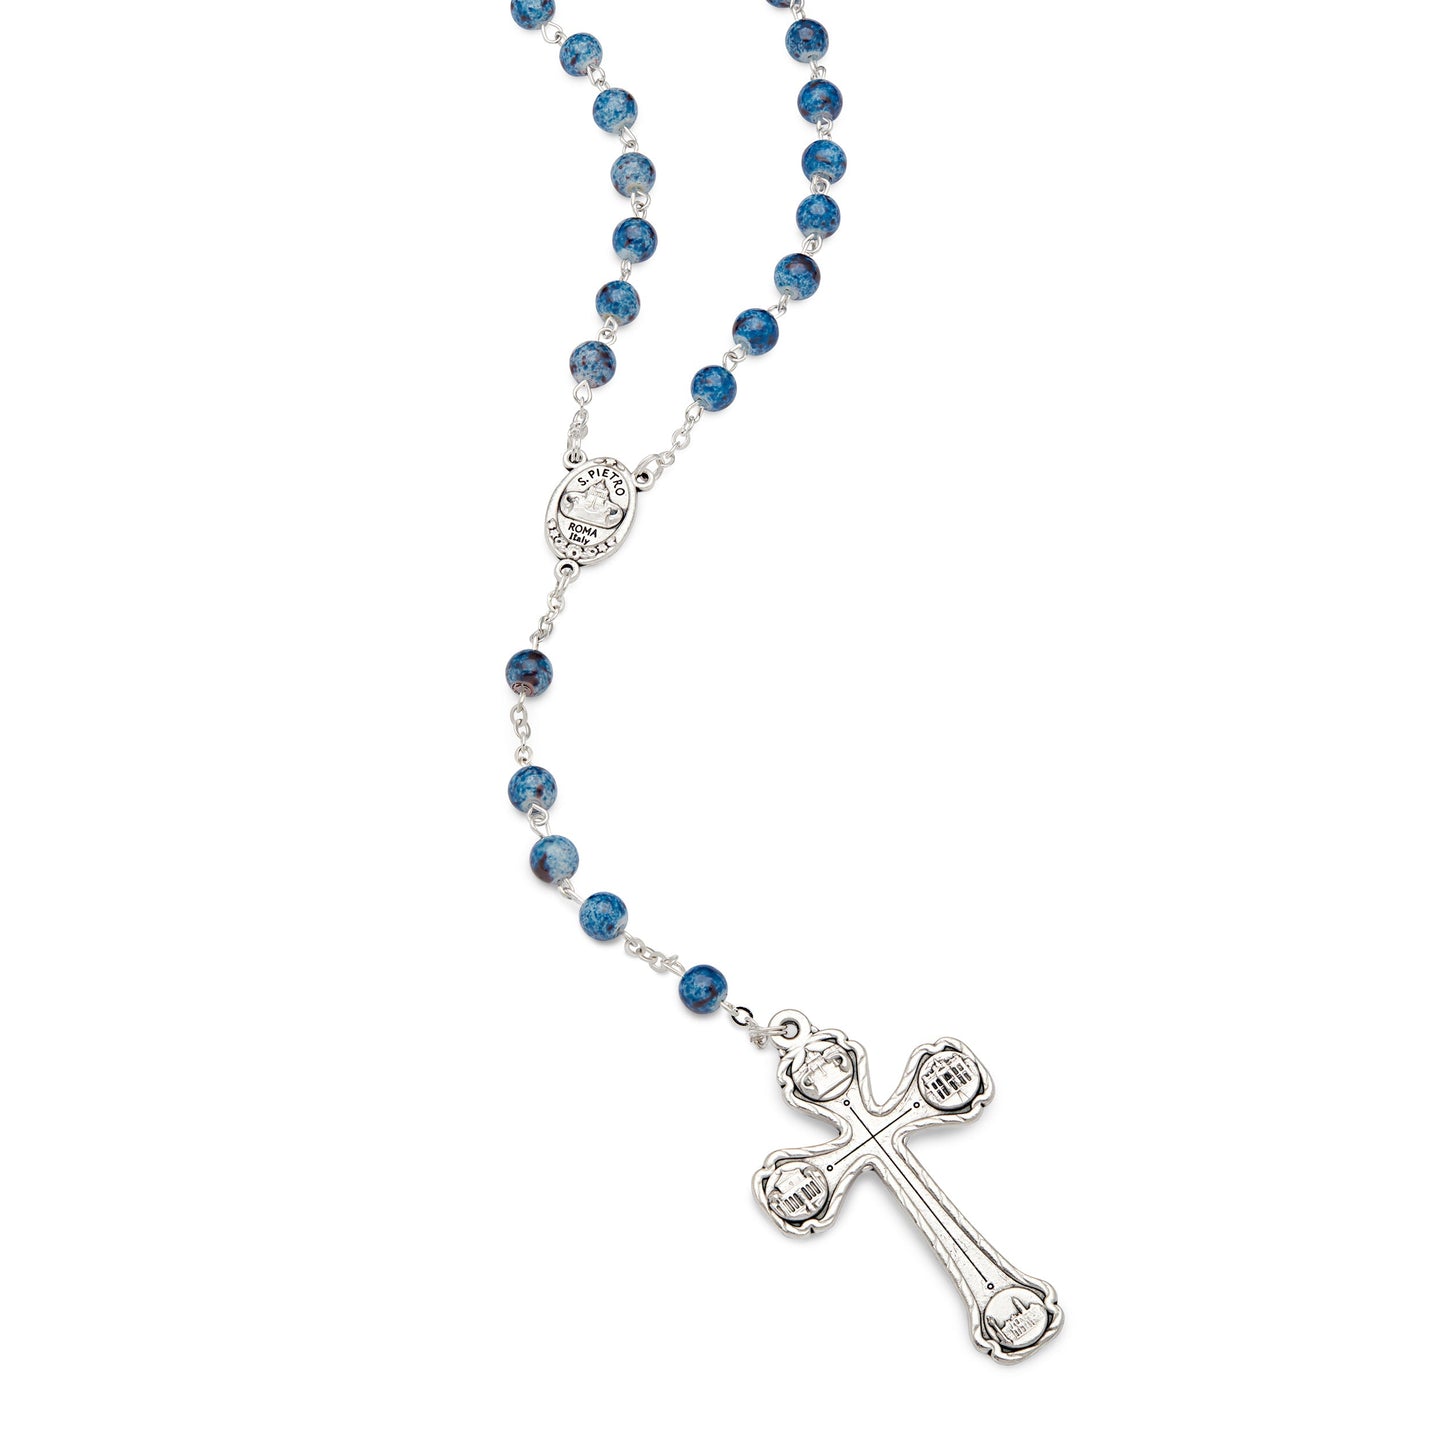 MONDO CATTOLICO Prayer Beads 48 cm (18.9 in) / 6 mm (0.24 in) Blue Variegated Rosary